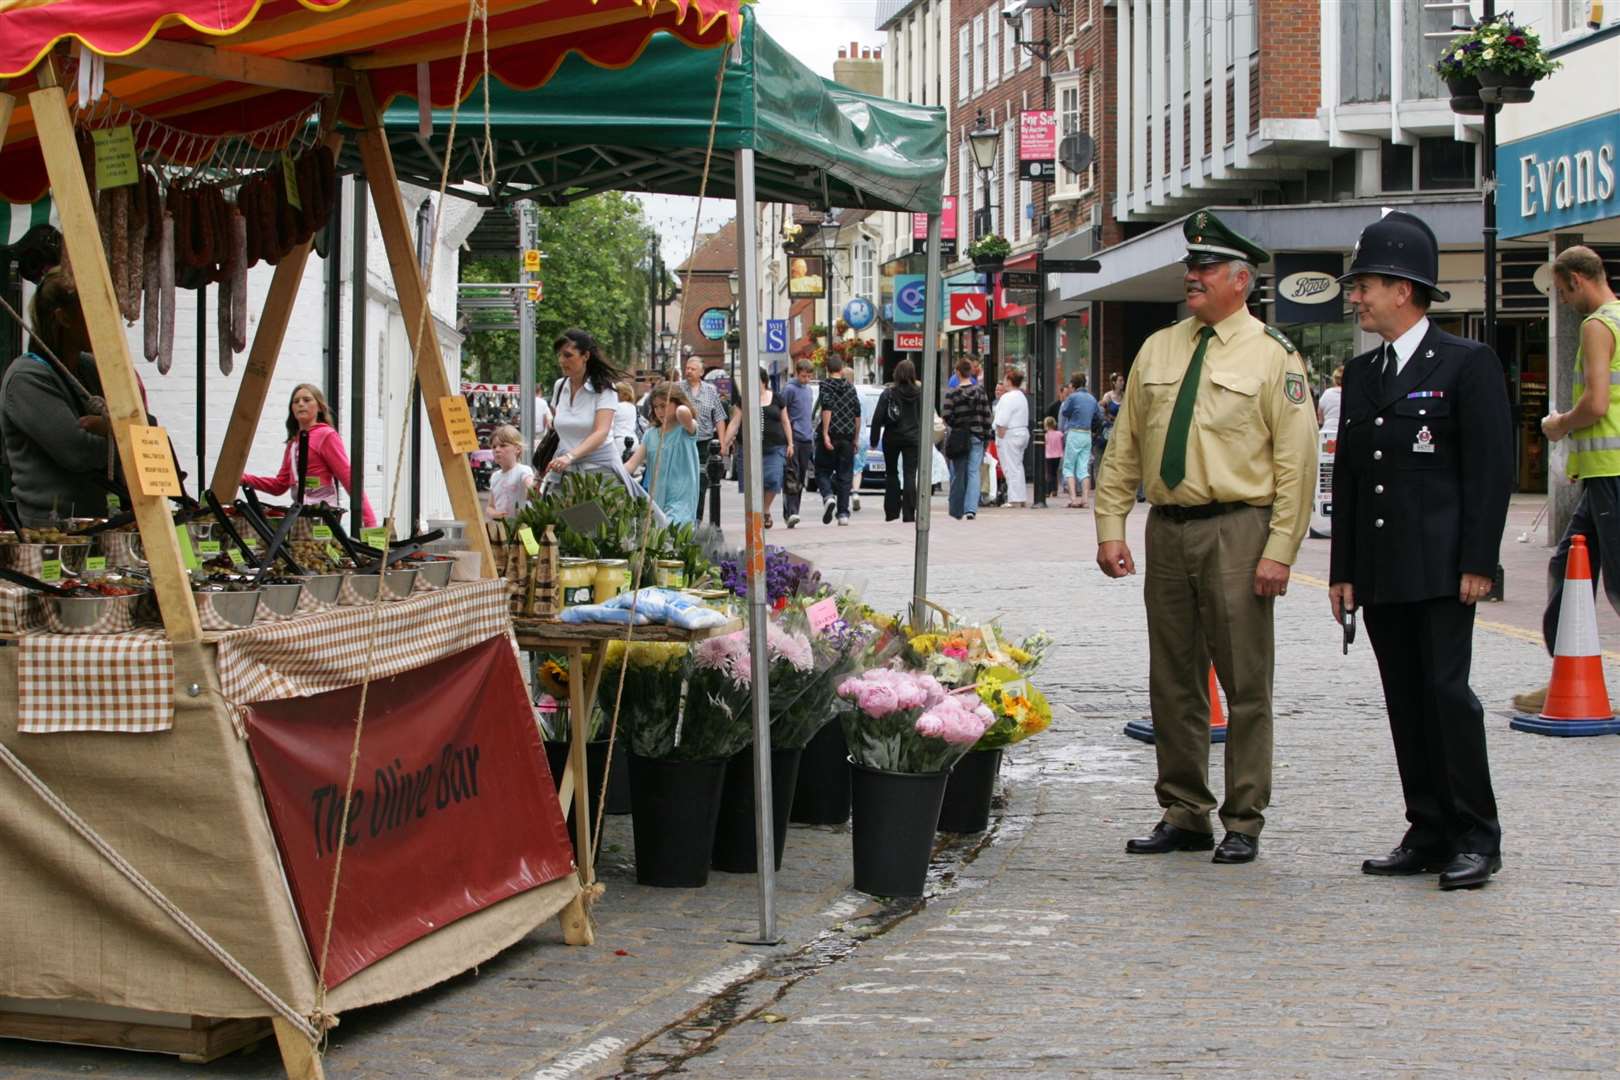 PC Don Grant on patrol in Ashford with Sgt Dieter Ohmen from Bad Münstereifel as part of the twinning celebrations in 2008